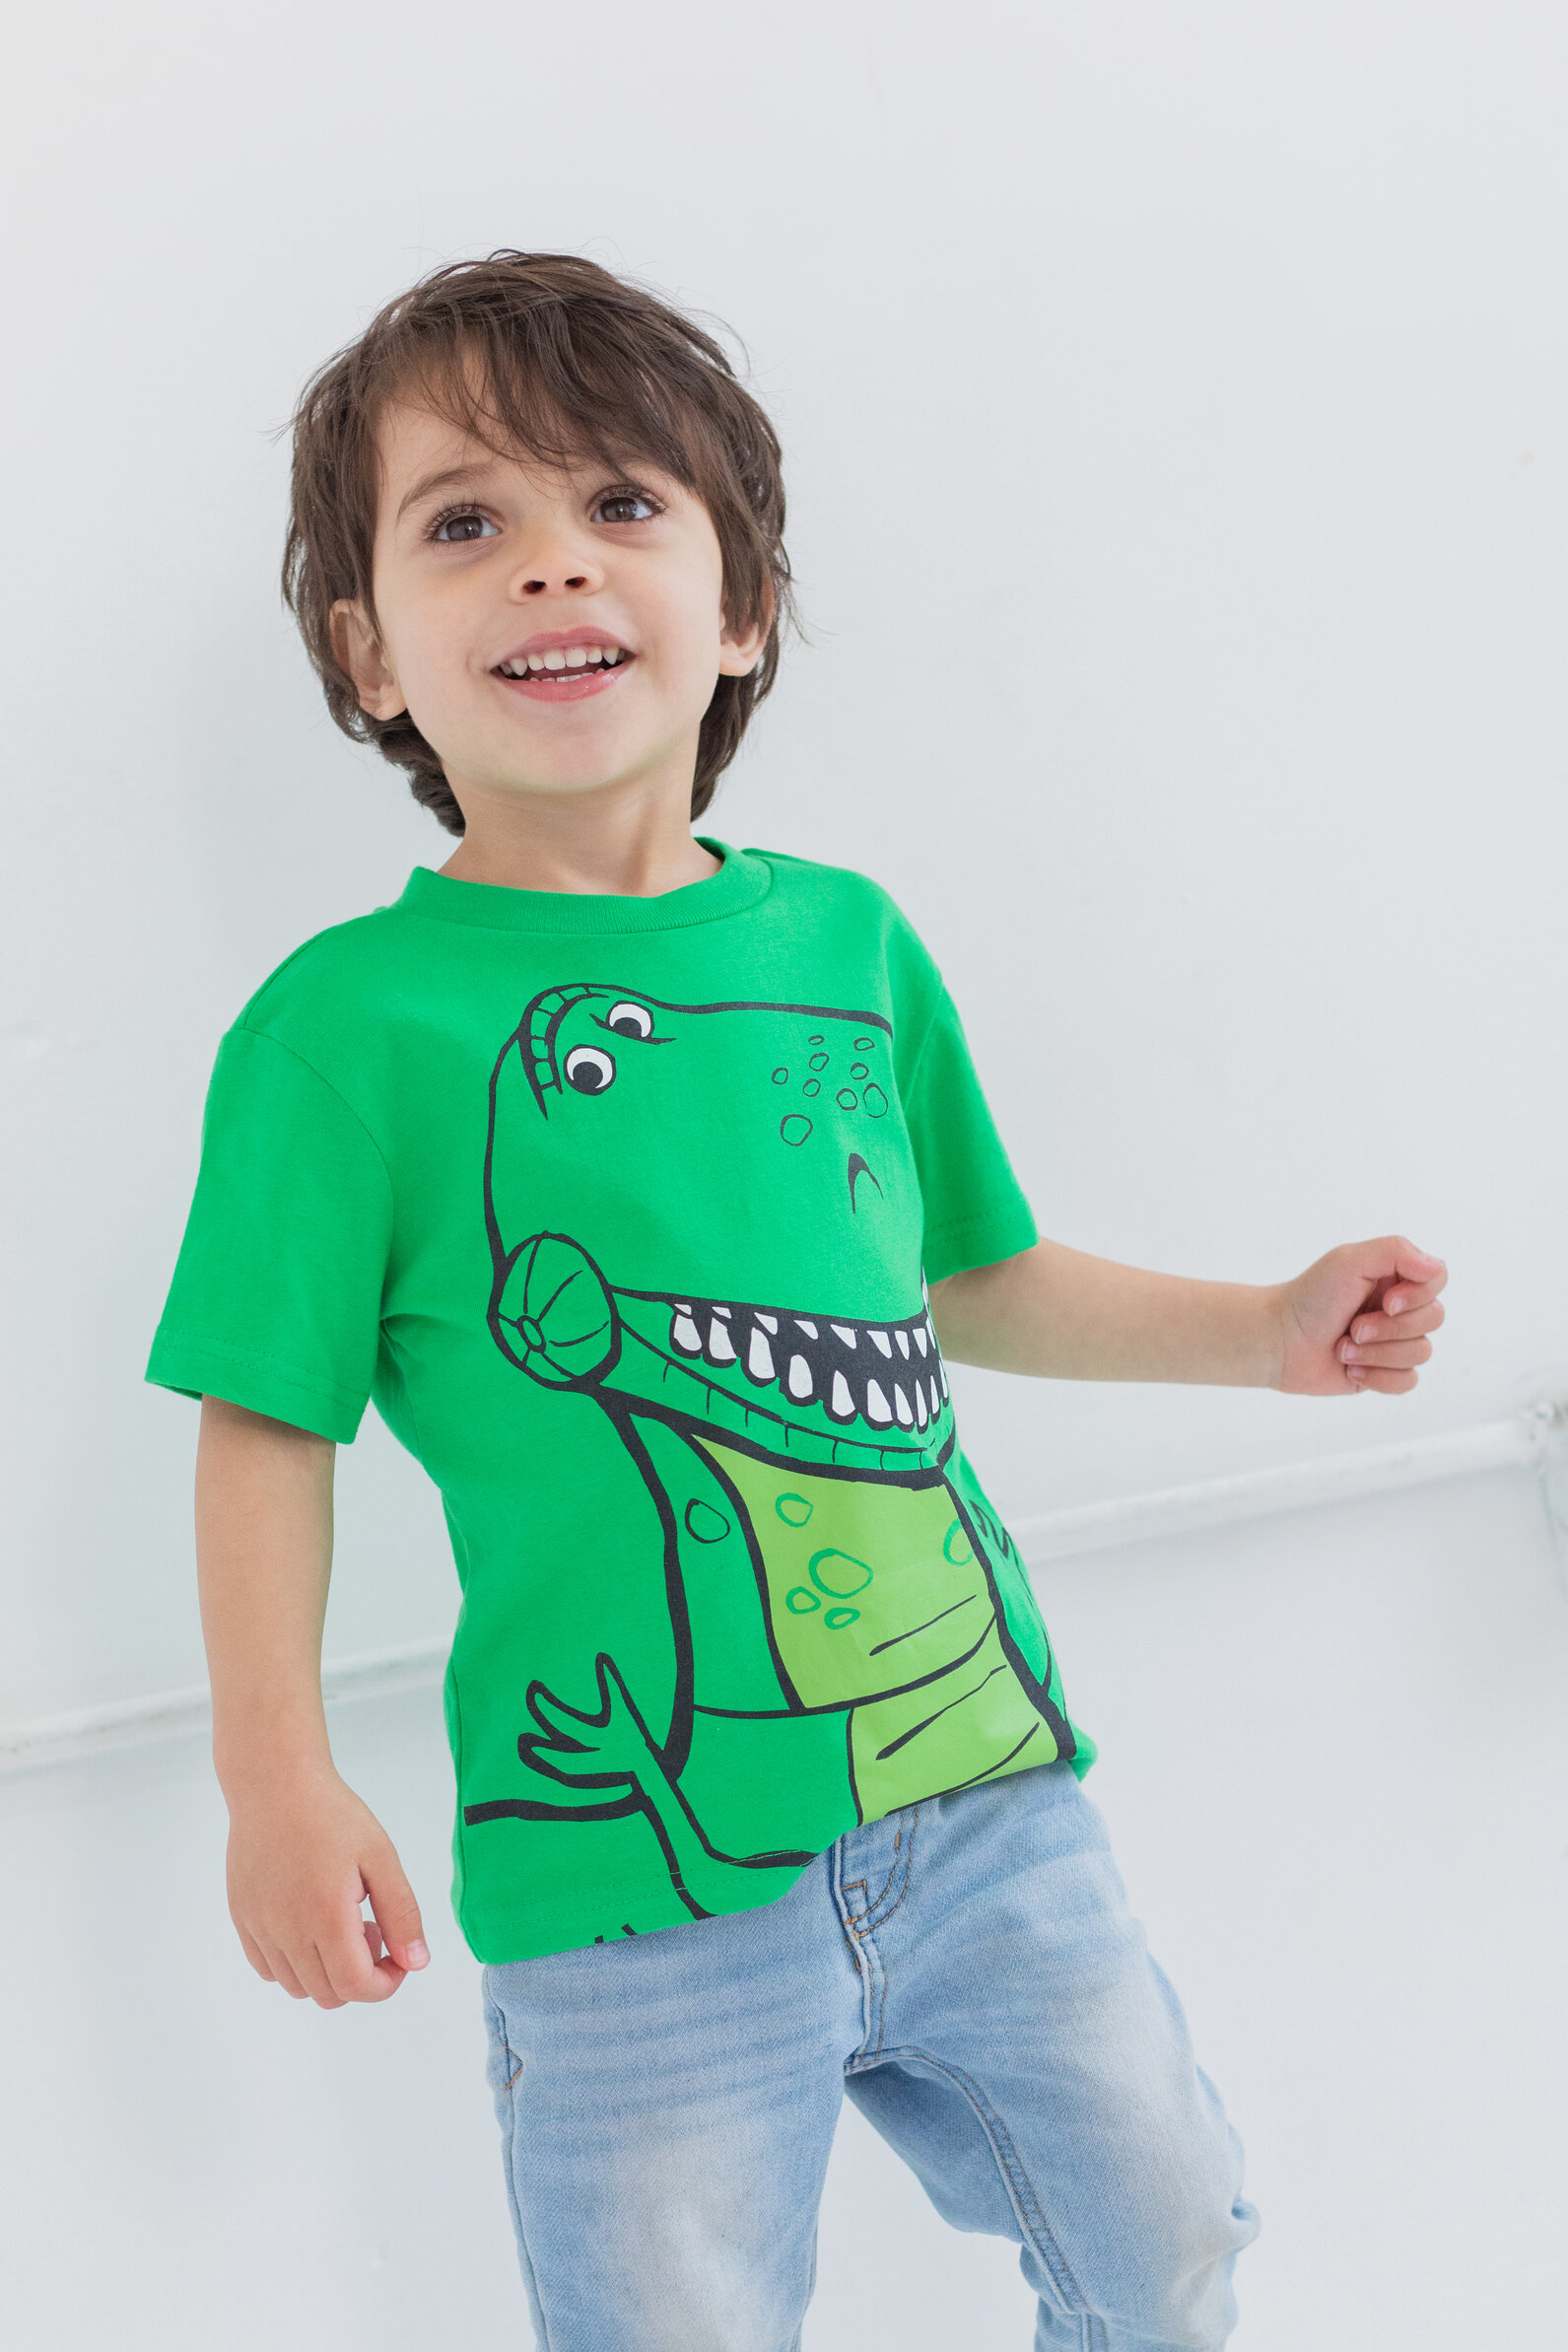 Disney Pixar Toy Story Woody Buzz Lightyear Rex Little Boys 3 Pack T-Shirts Toddler to Big Kid - image 3 of 5